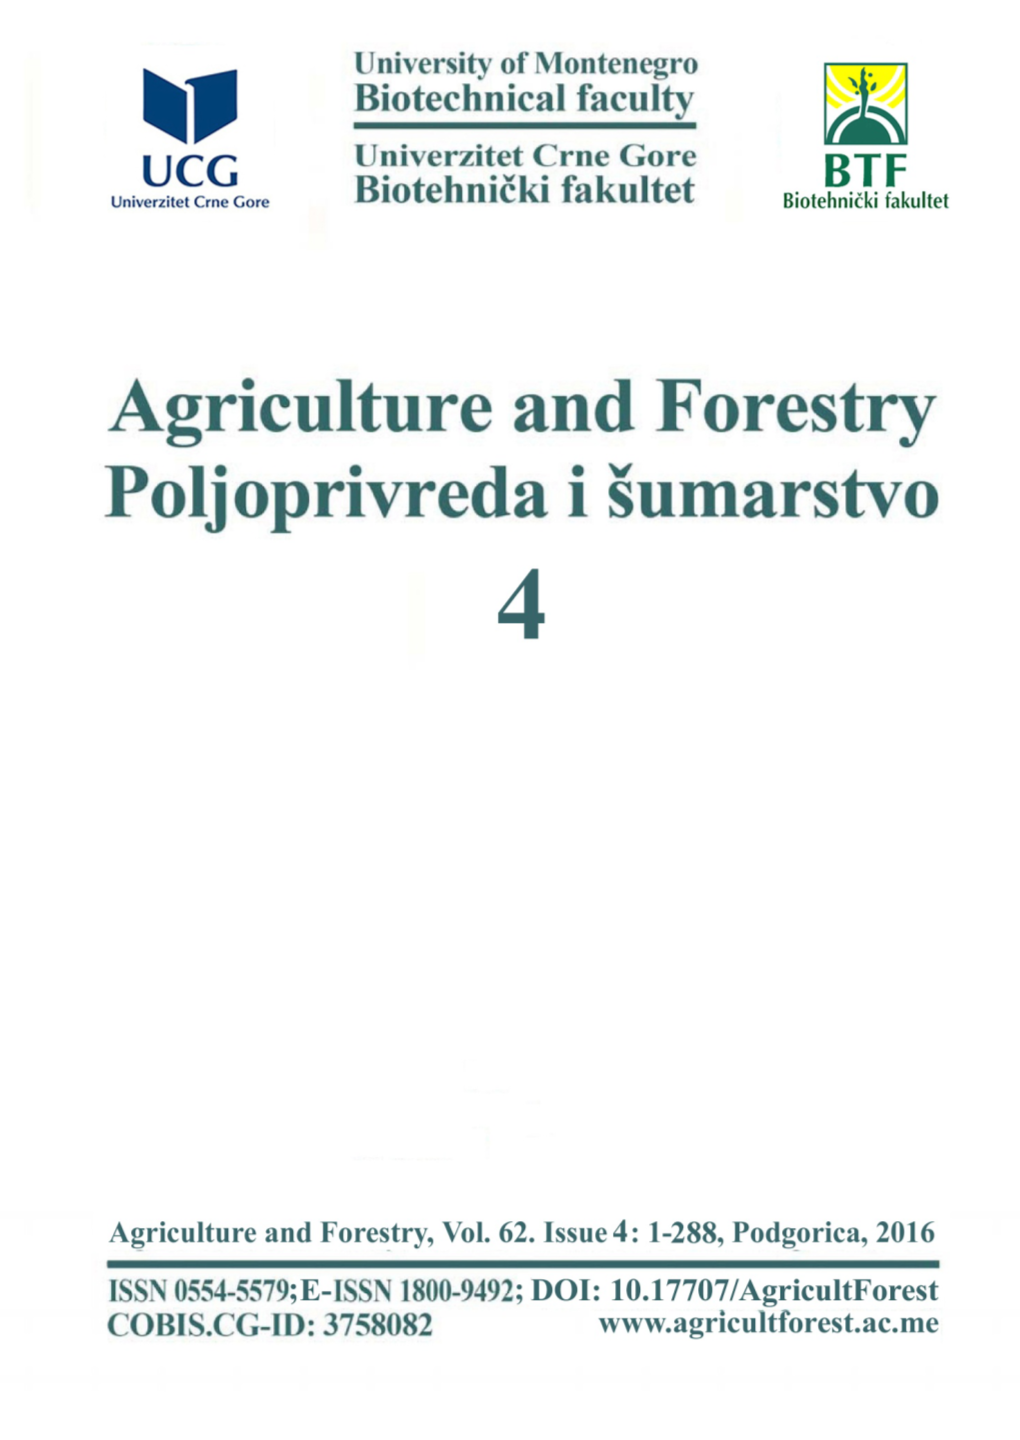 Agriculture and Forestry, Volume 62. Issue 4: 1-288, Podgorica, 2016 2